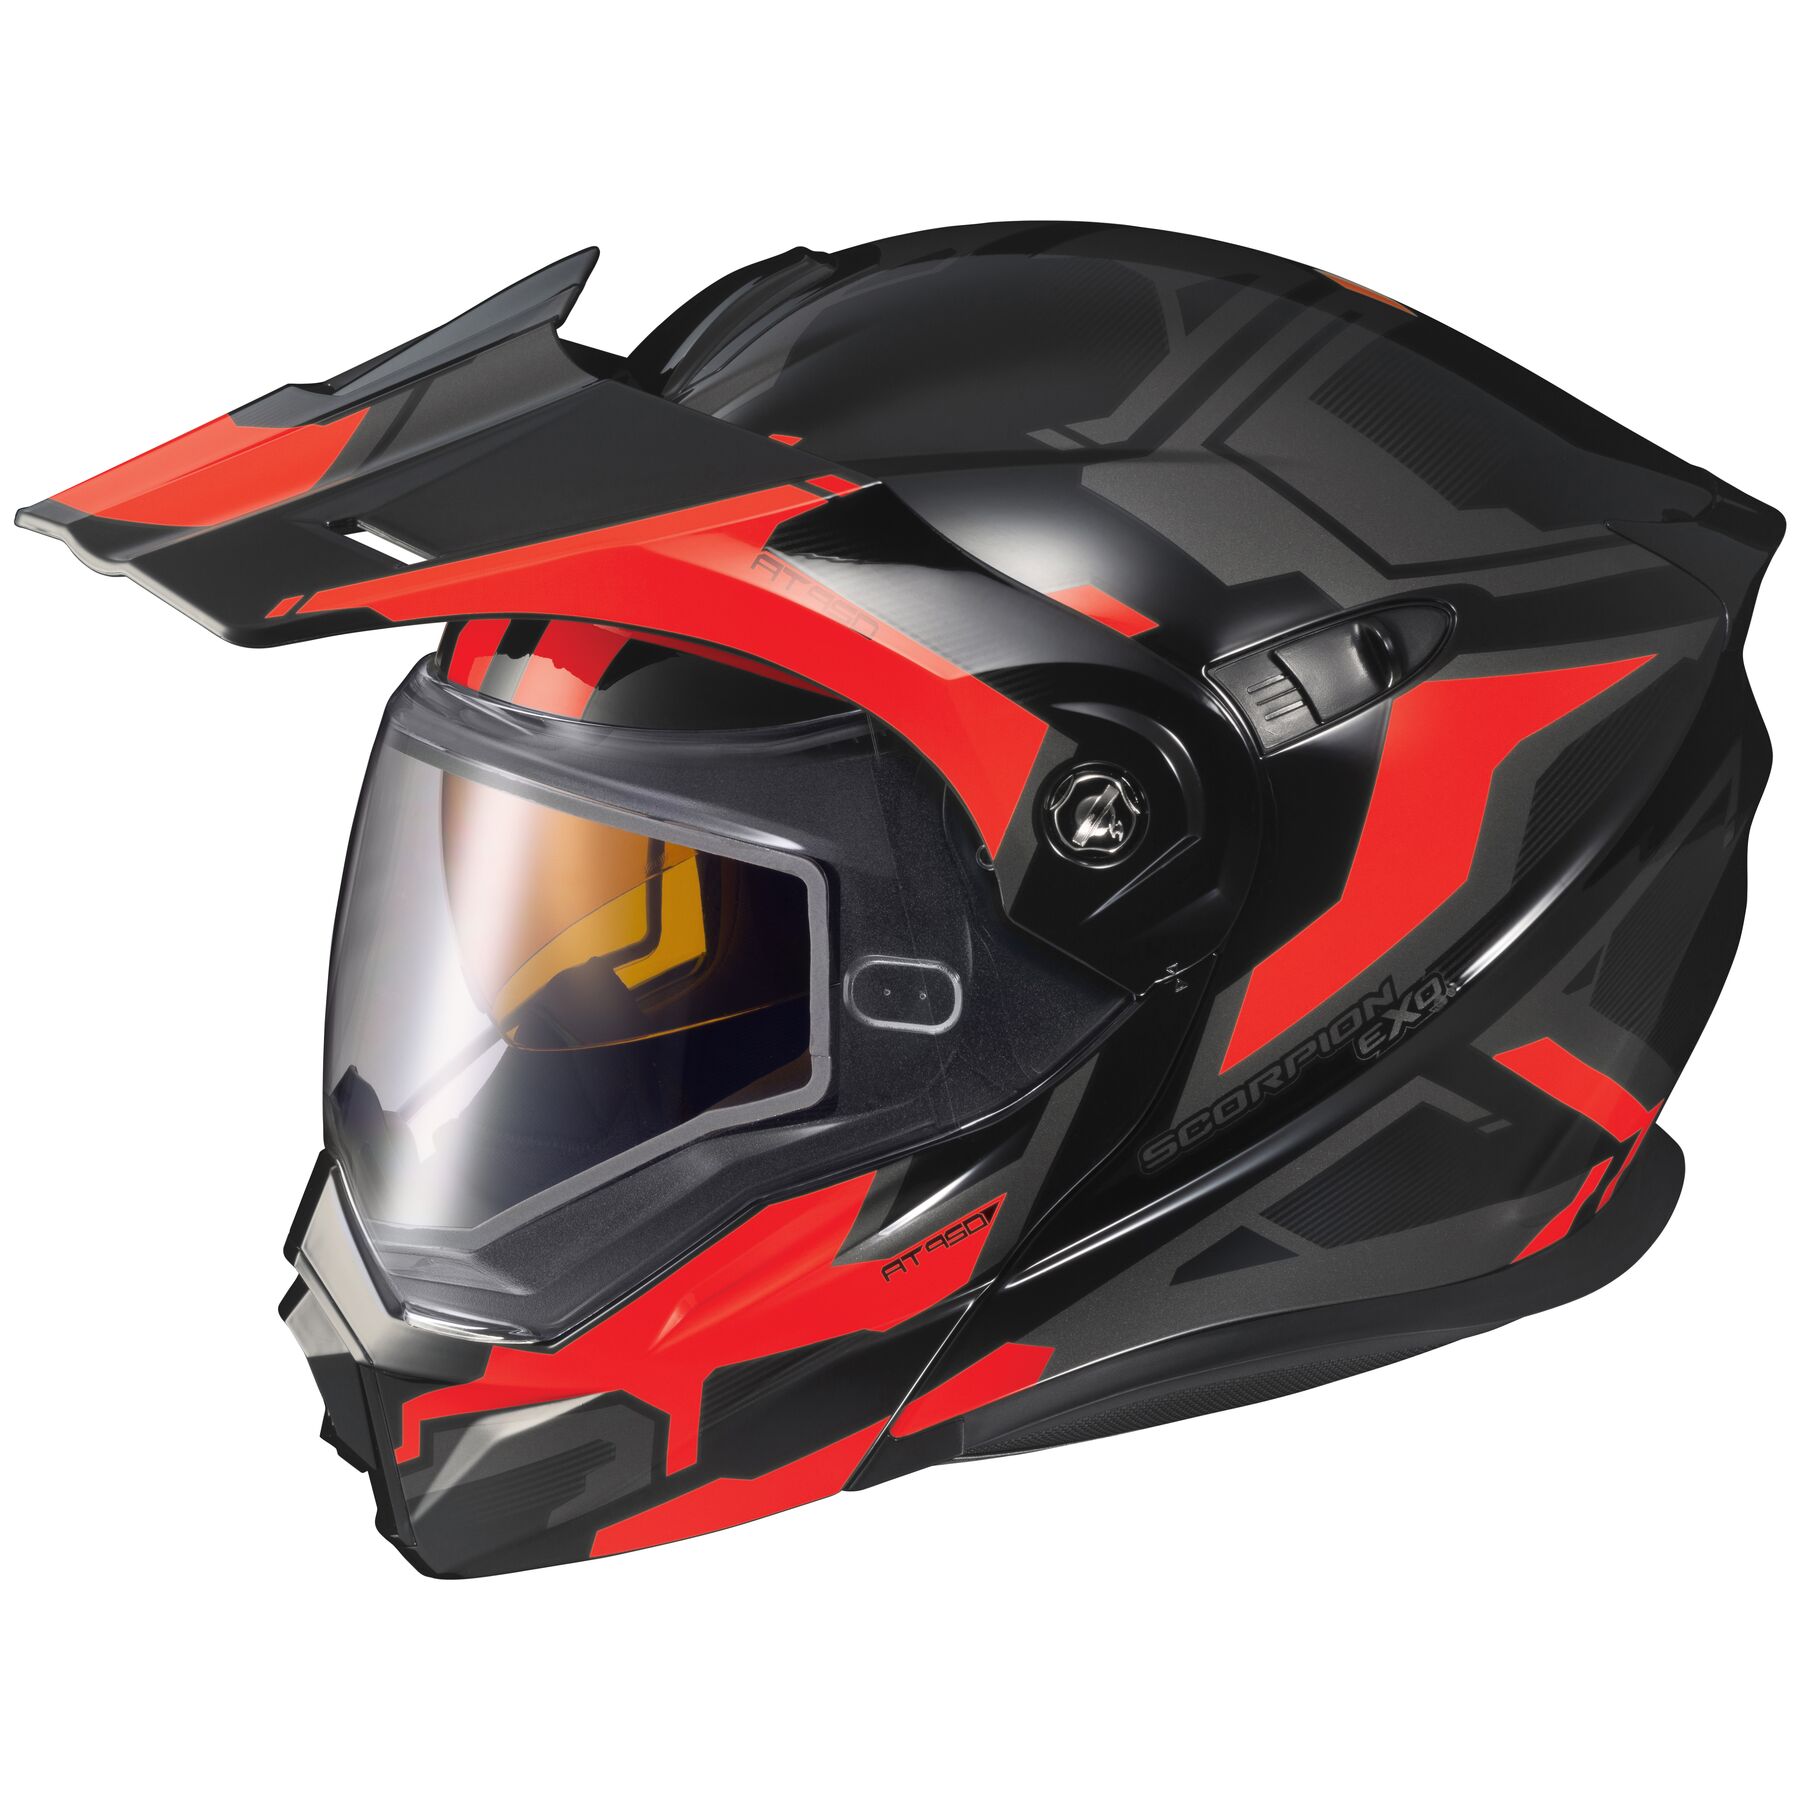 Scorpion EXO AT950 in Red/Black